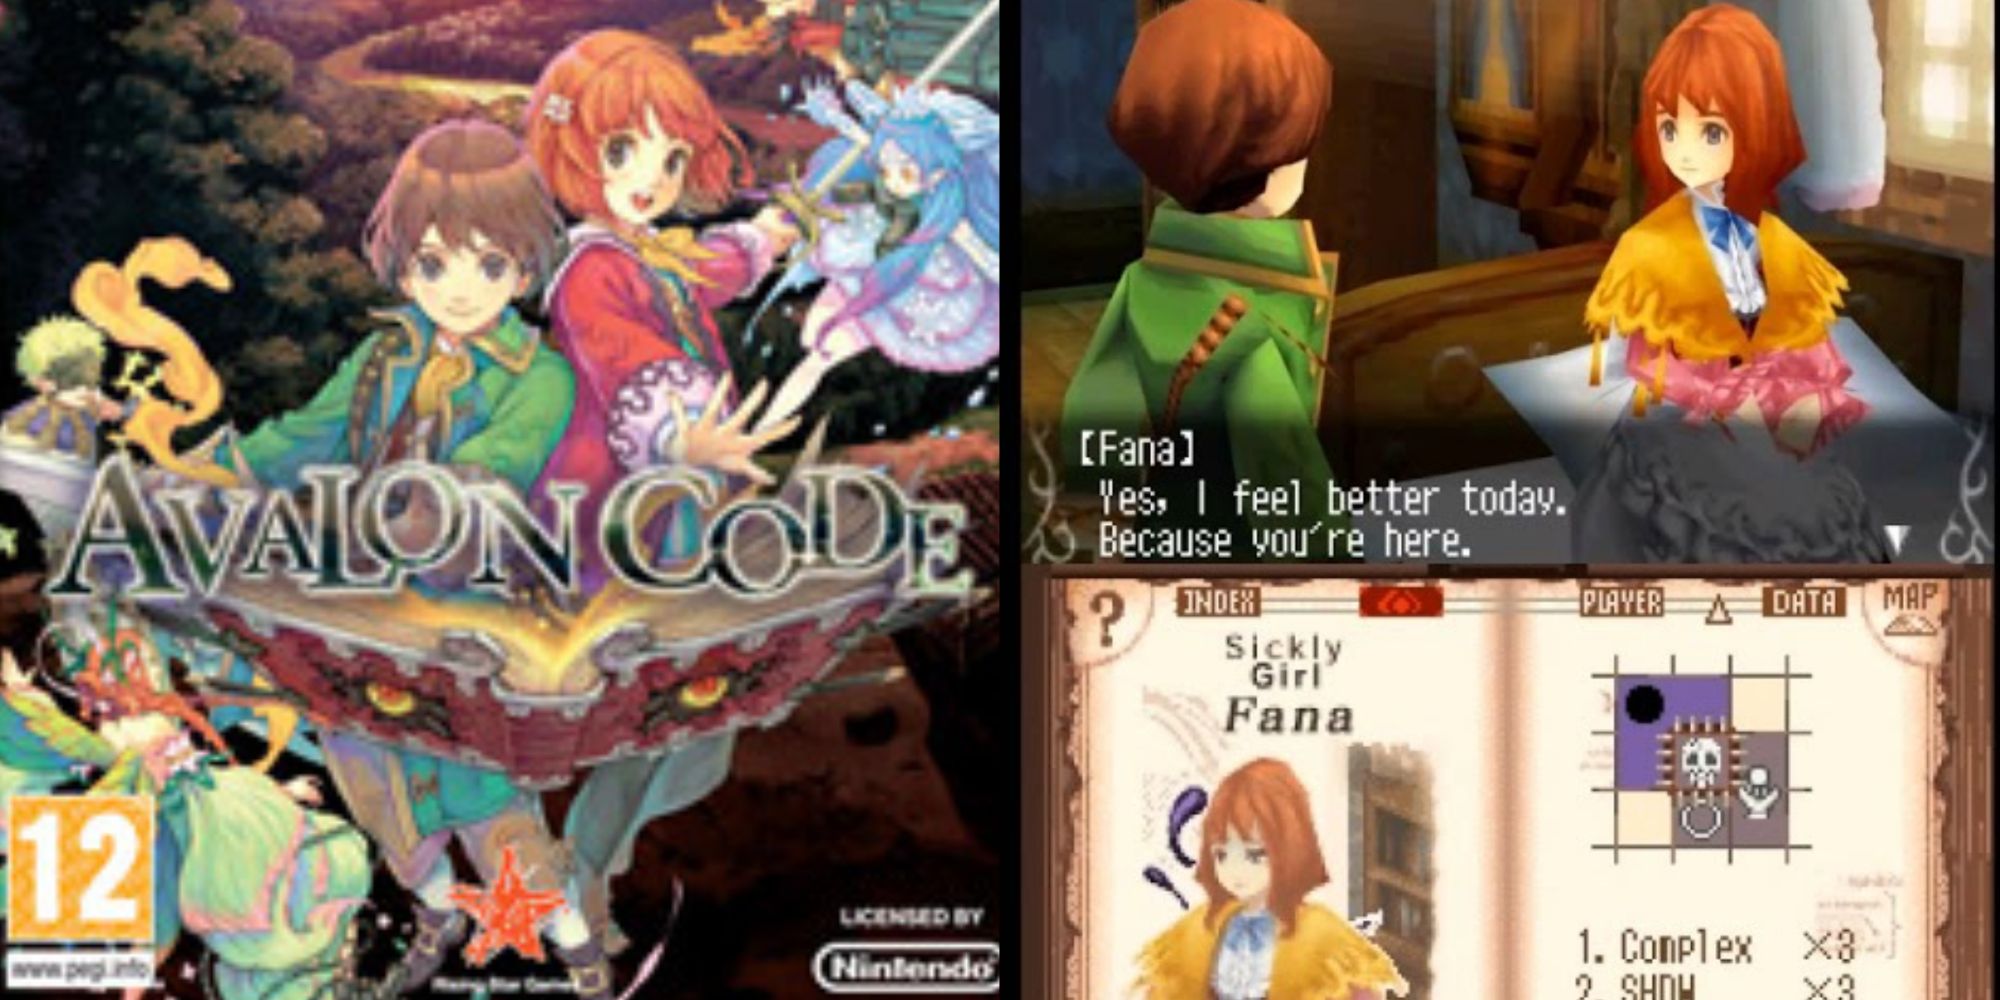 Split image screenshots of the Avalon Code box art and the main character speaking to Fana, showing her description on the bottom screen.